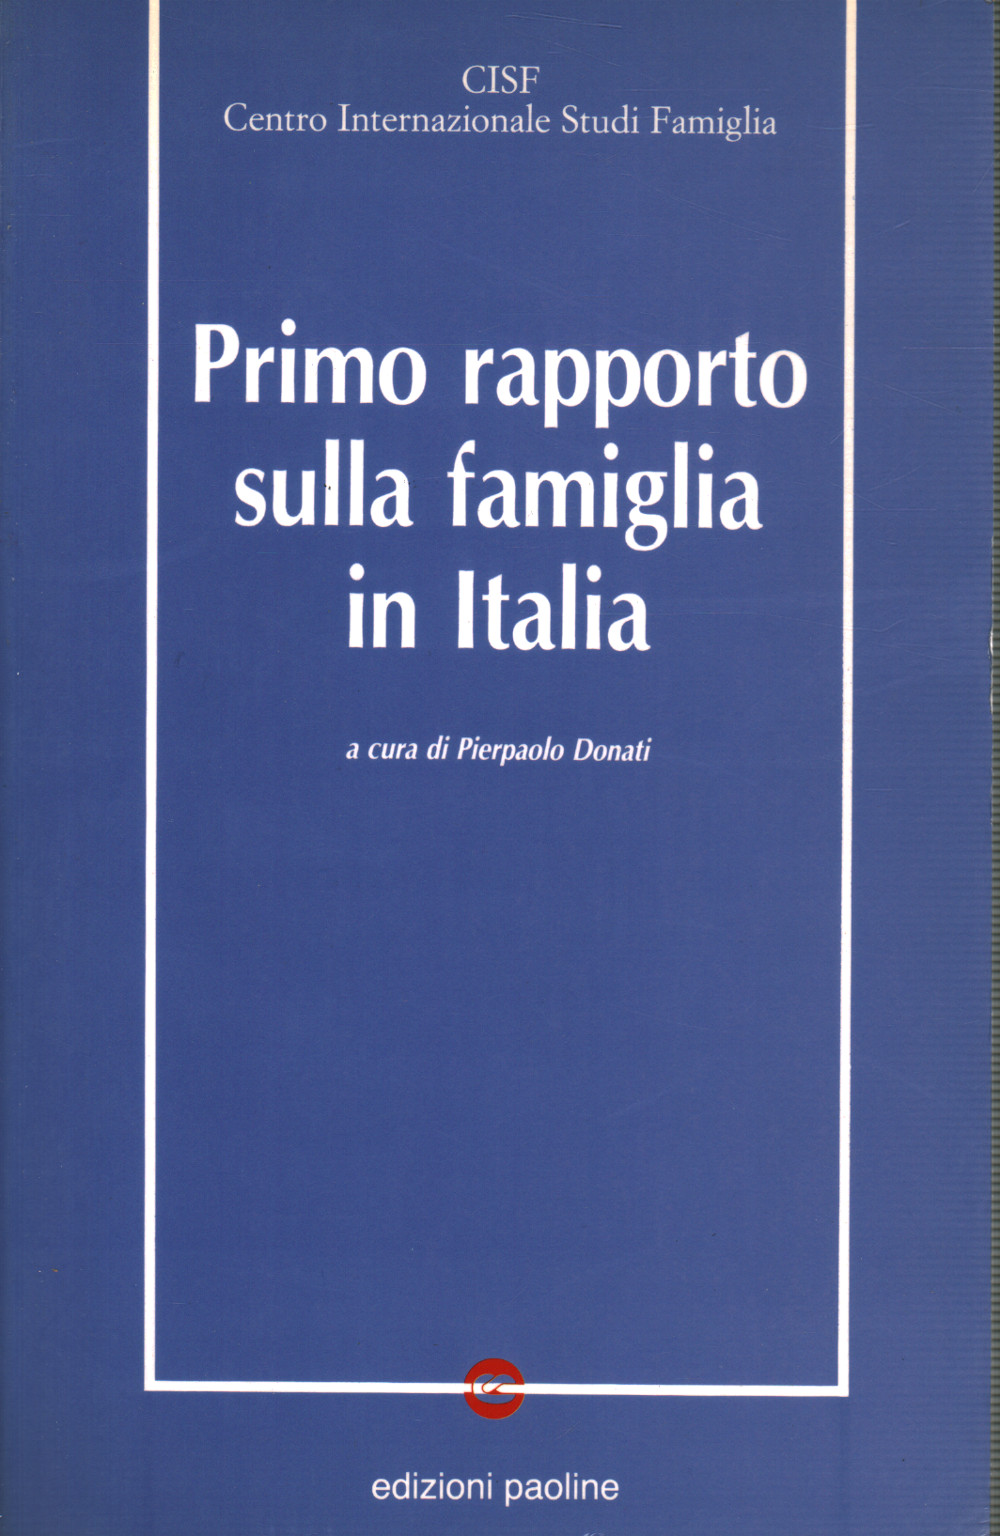 First report on the family in Italy, s.a.